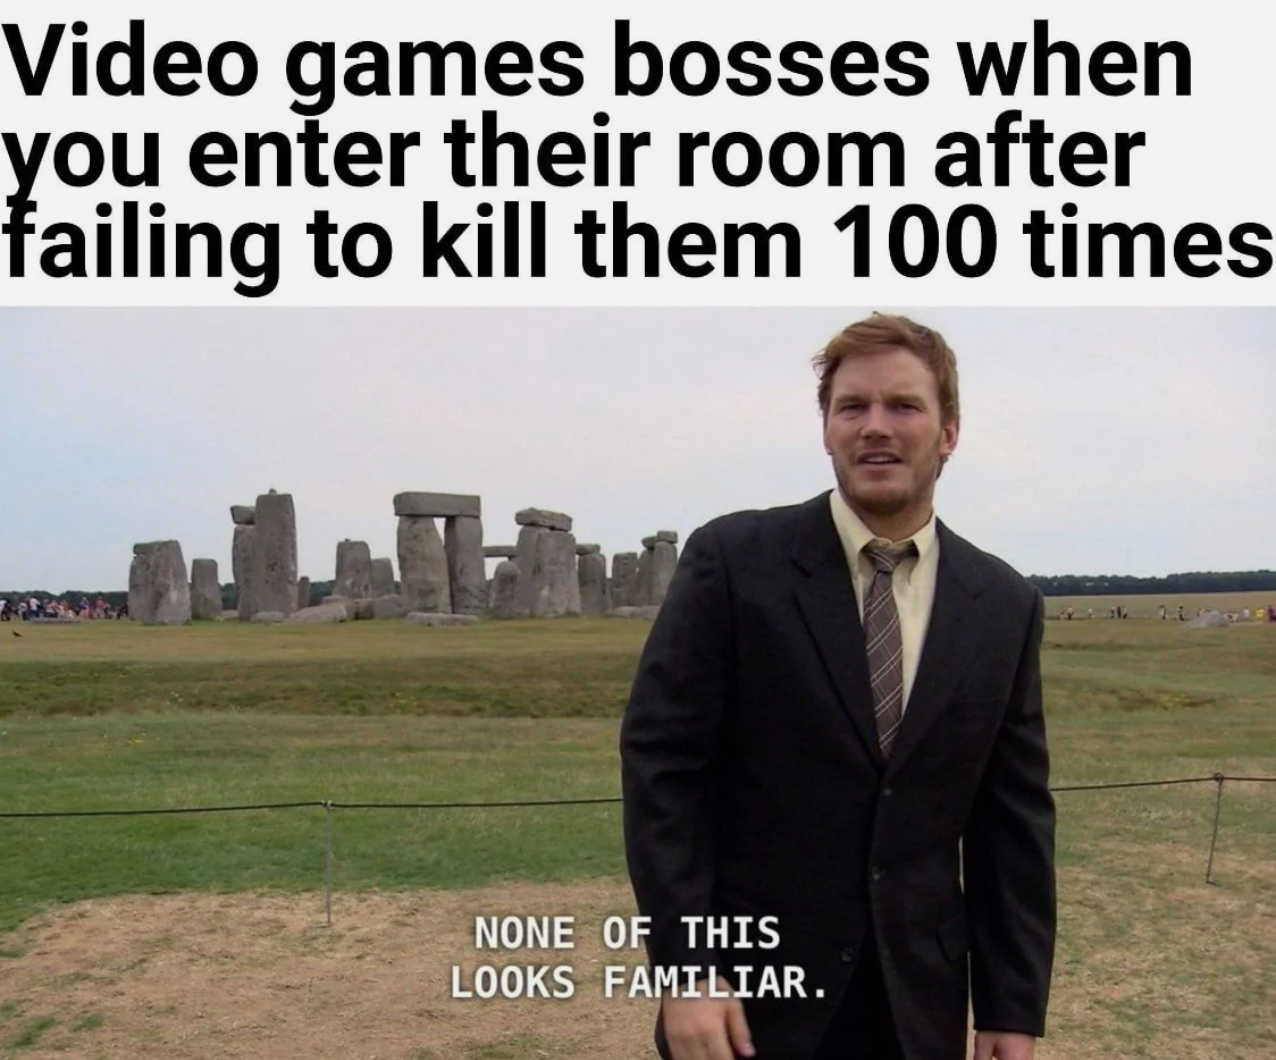 stonehenge - Video games bosses when you enter their room after failing to kill them 100 times None Of This Looks Familiar.